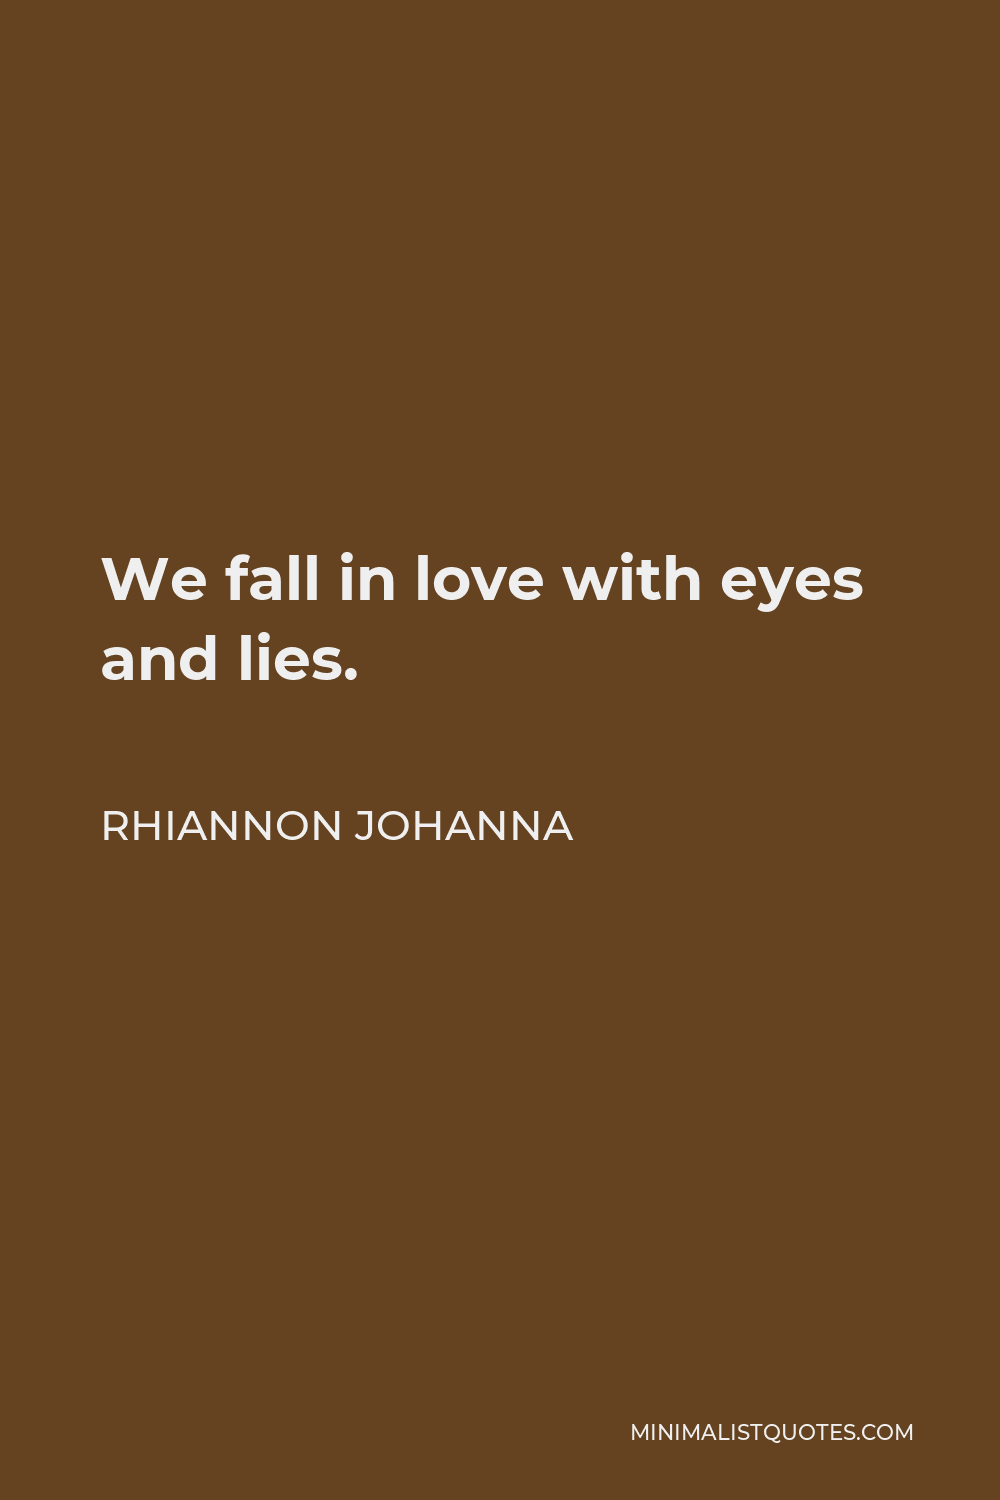 Rhiannon Johanna Quote - We fall in love with eyes and lies.